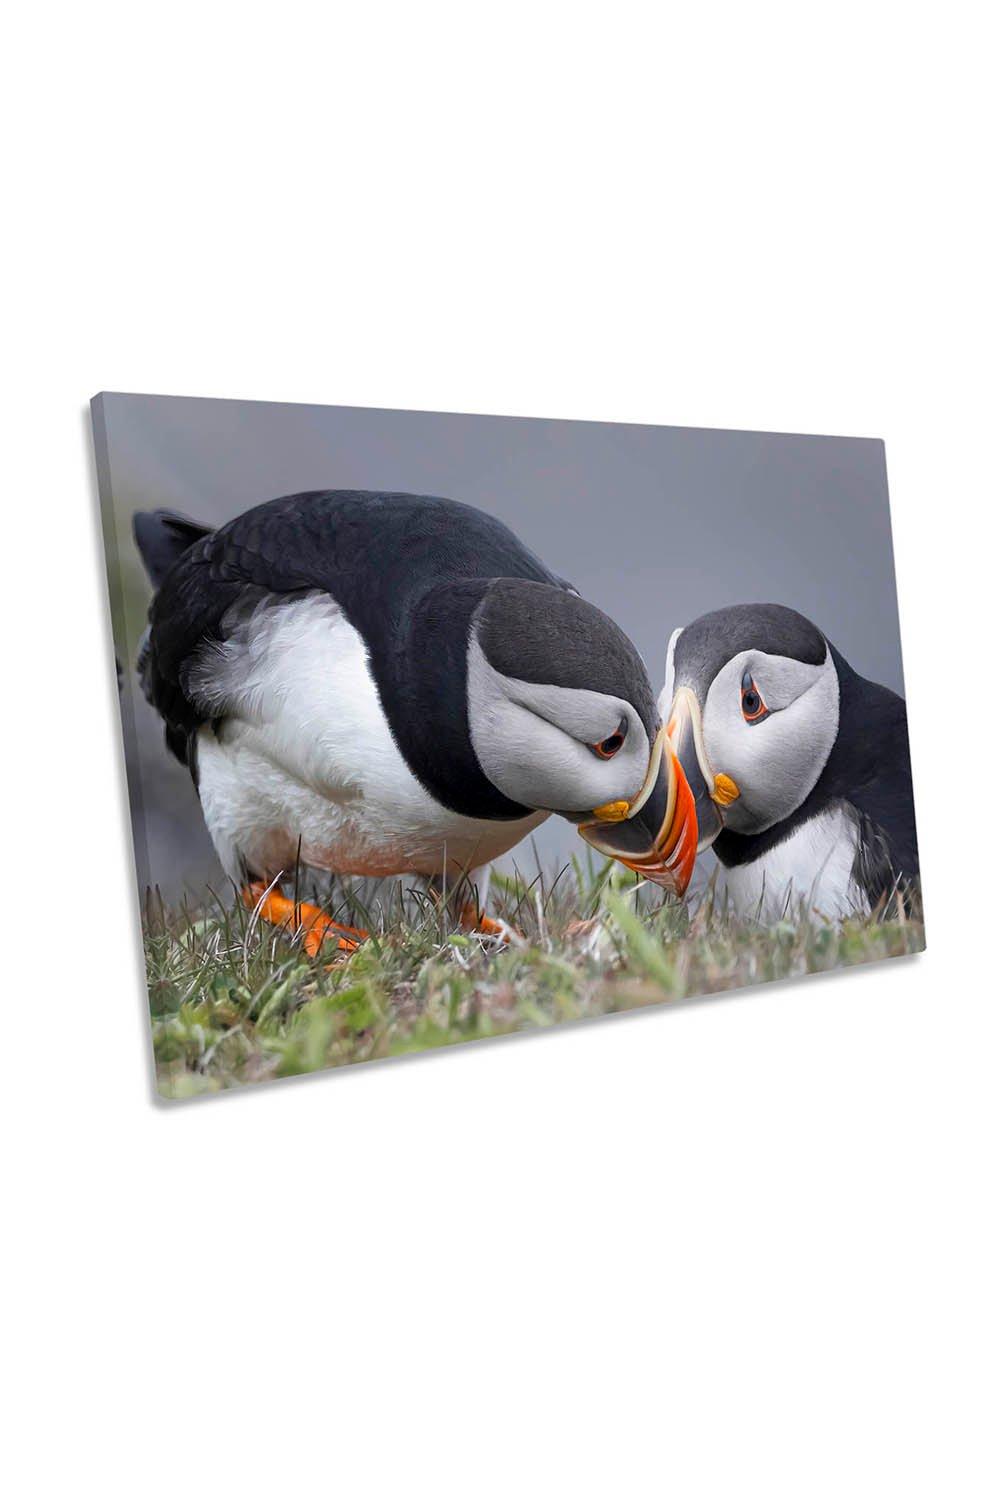 Whisper Pair of Puffin Birds Wildlife Canvas Wall Art Picture Print